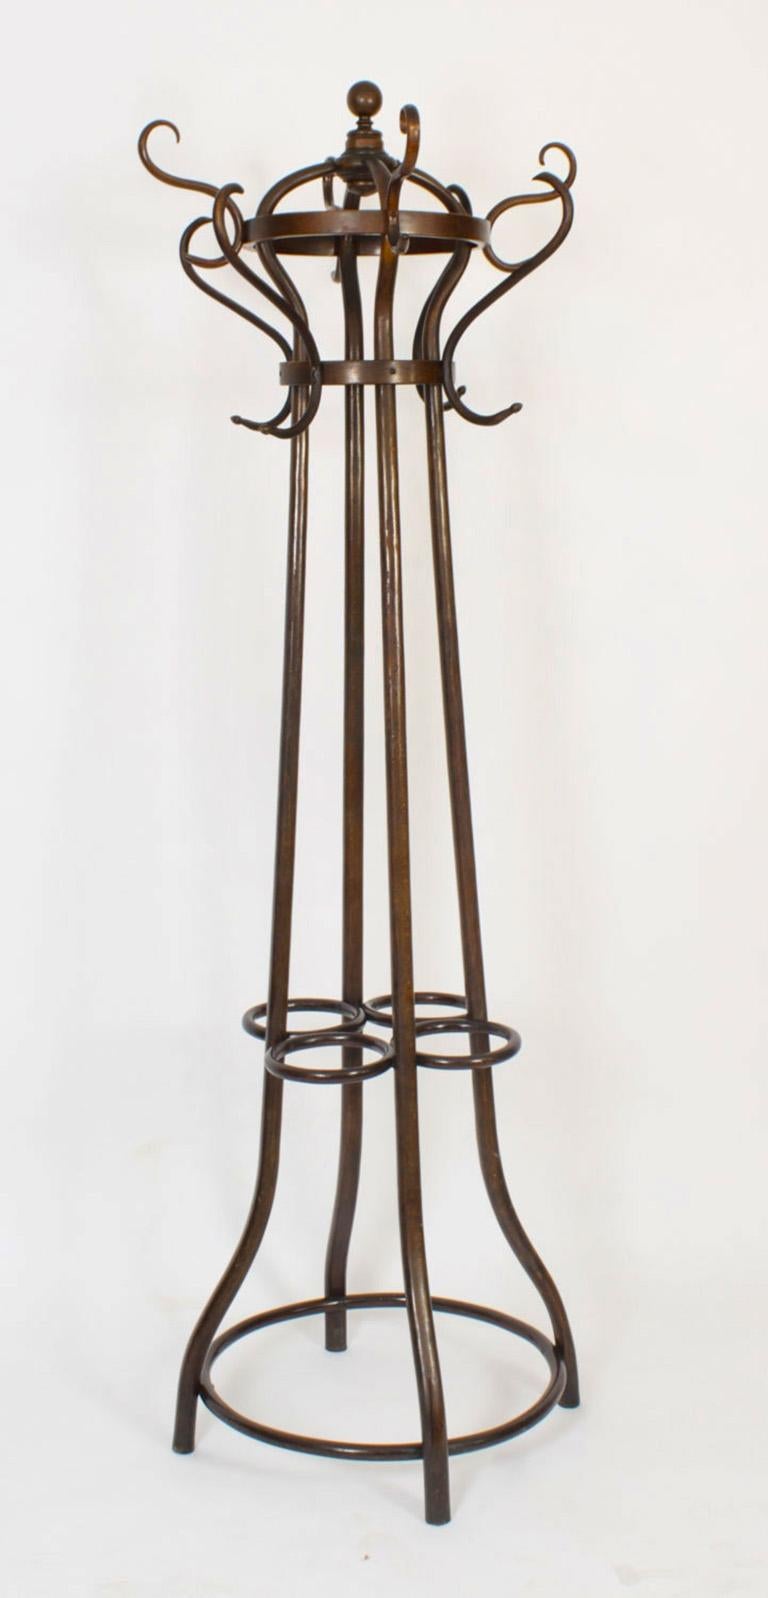 Antique Pair Victorian Bentwood Hall Umbrella Coat Stands 19th Century In Good Condition For Sale In London, GB